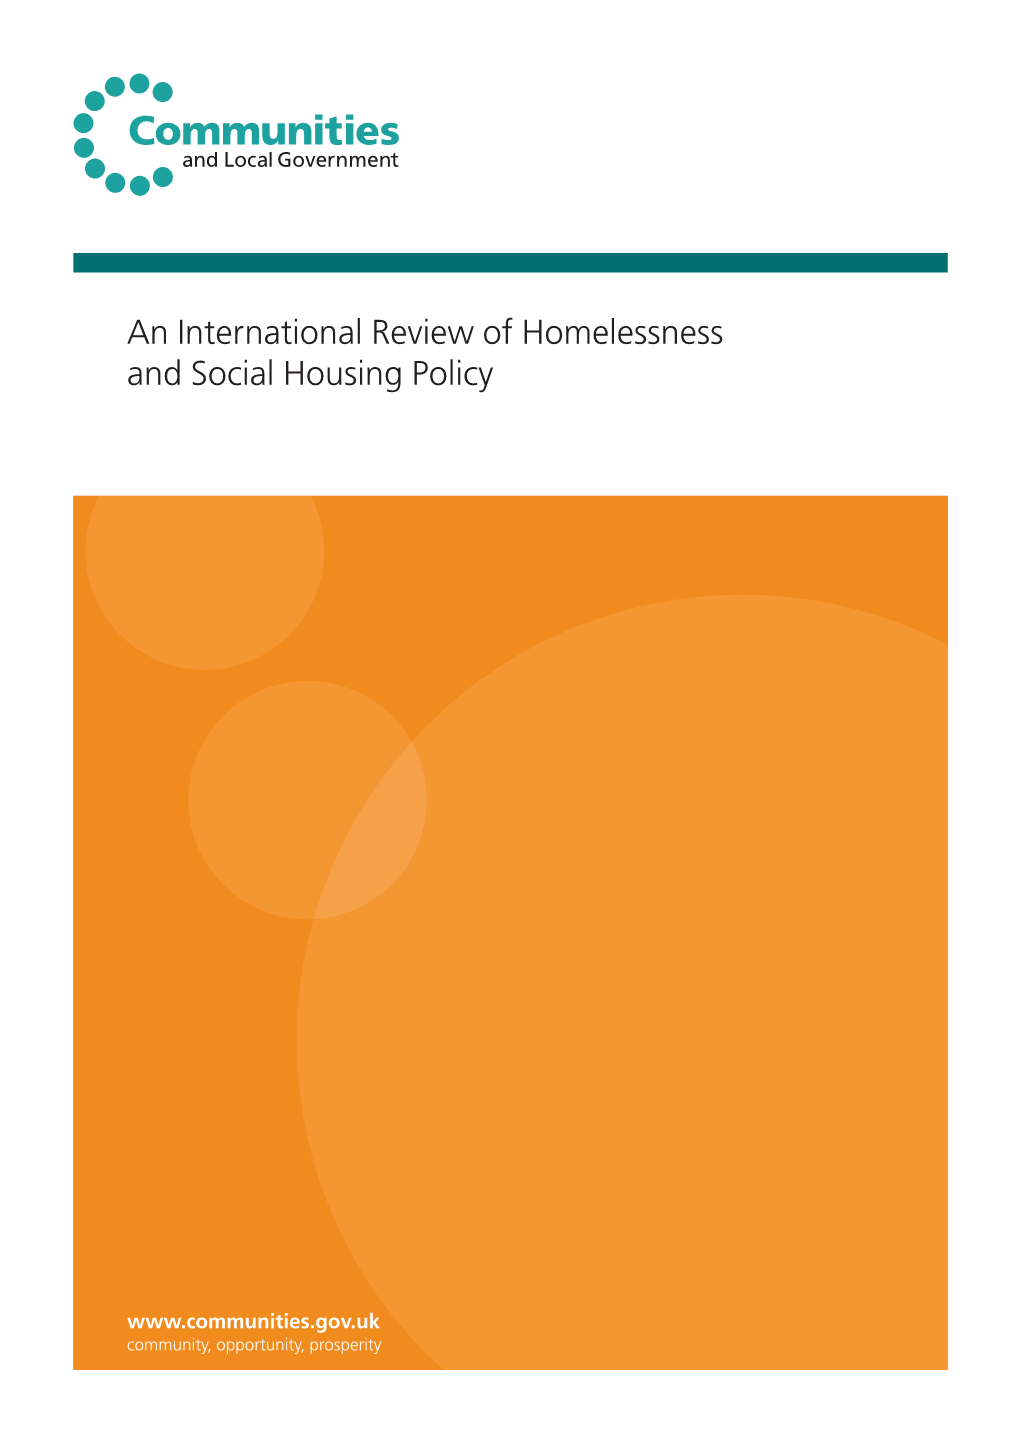 An International Review of Homelessness and Social Housing Policy